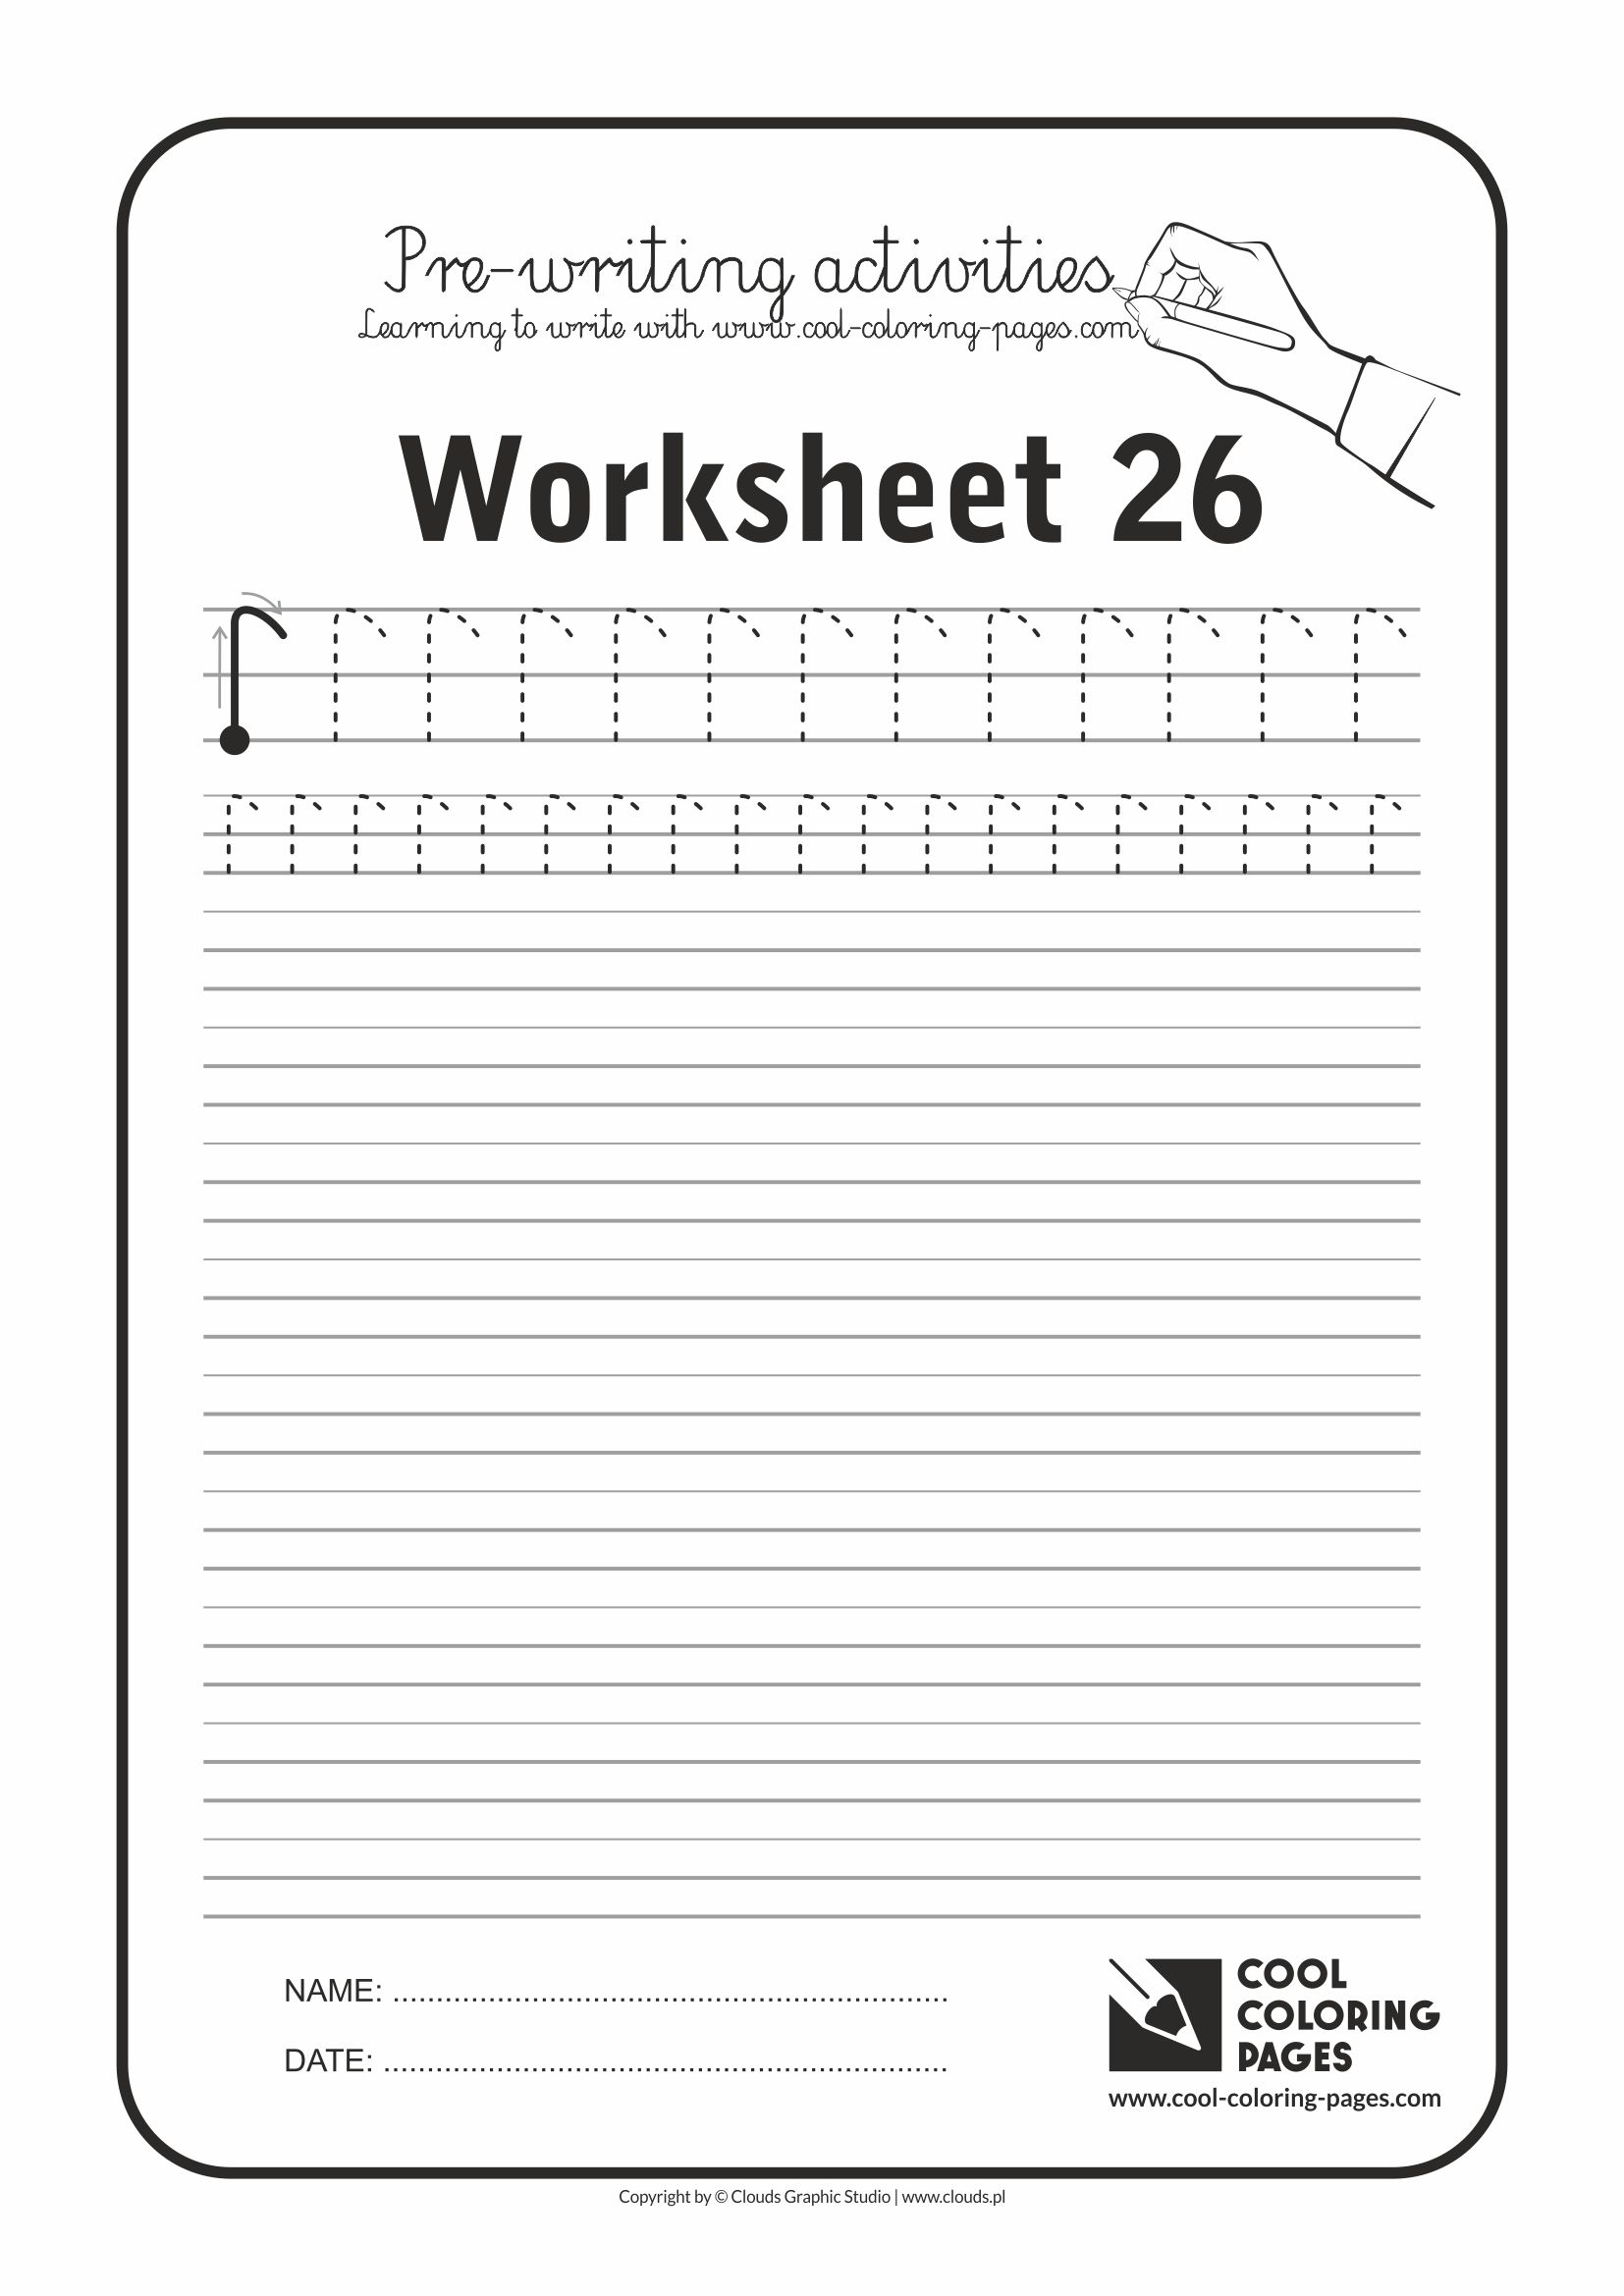 Cool Coloring Pages / Pre-writing activities / Worksheet no.26